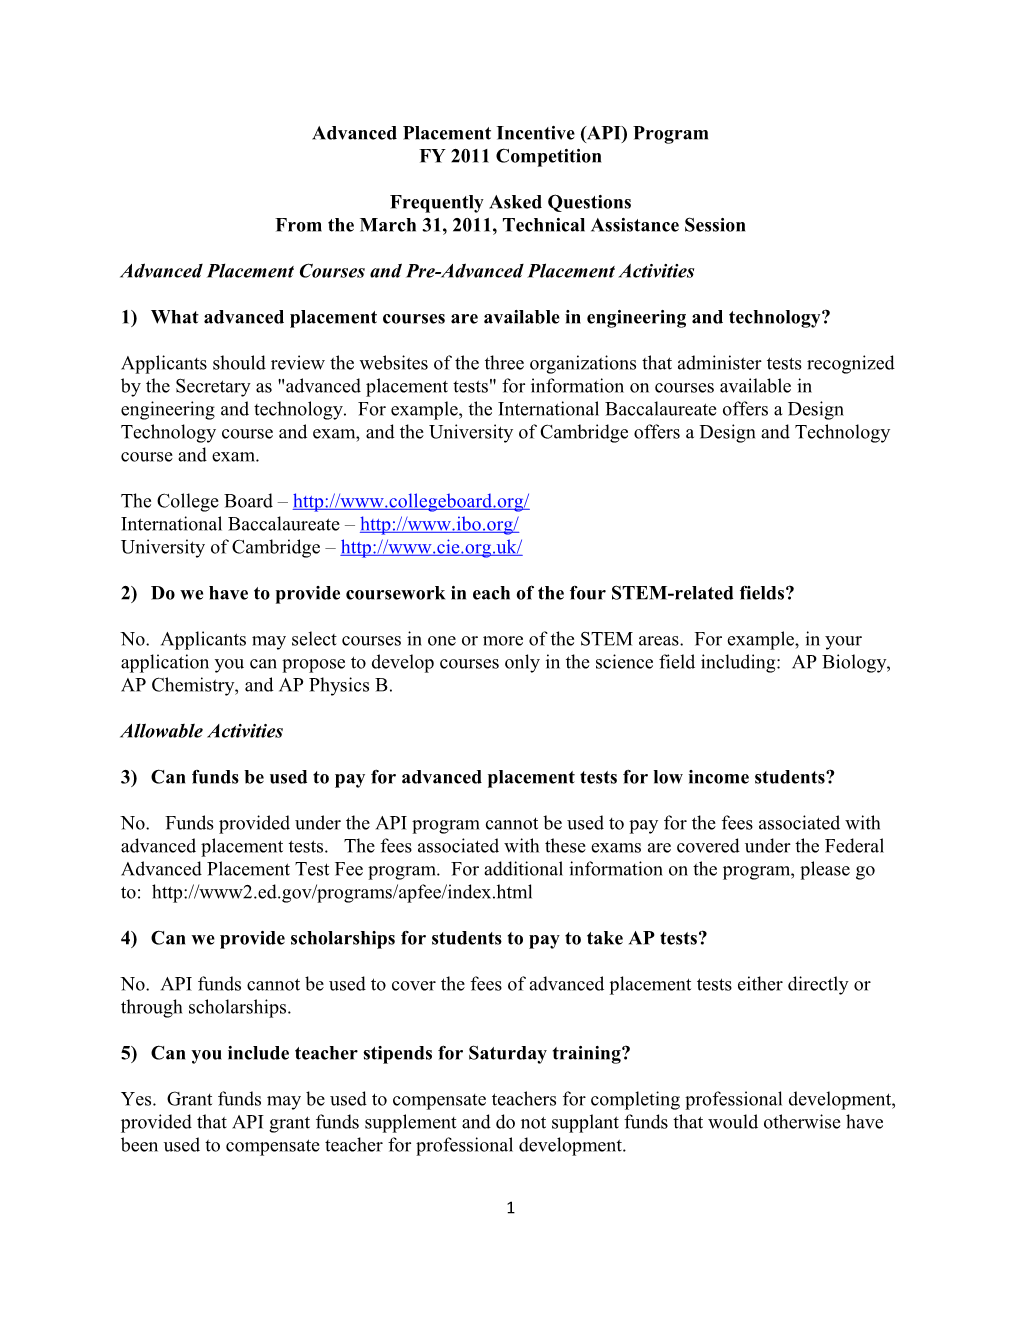 Advanced Placement Incentive Program FY 2011 Competition Frequently Asked Questions Fom